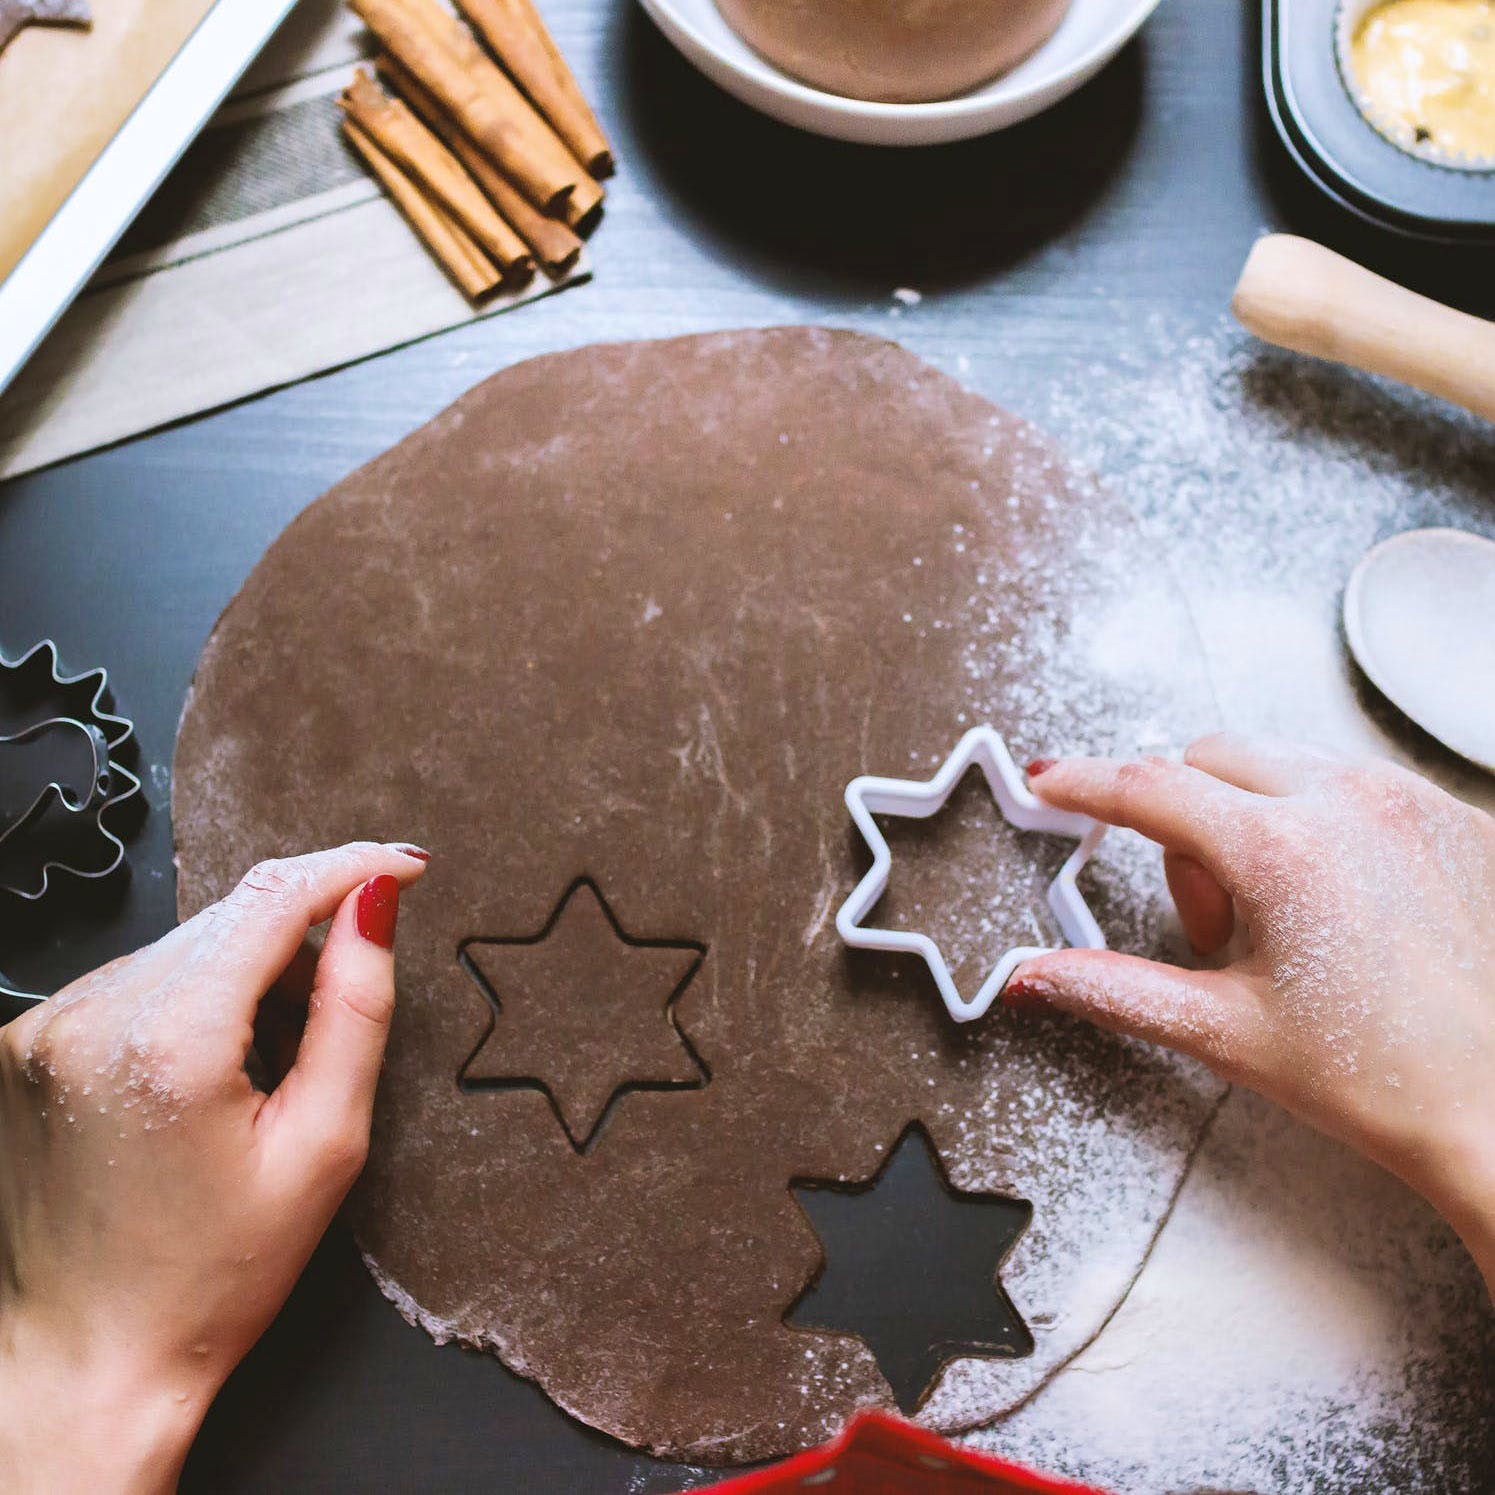 Gingerbread,Food,Rolling pin,Coffee filter,Royal icing,Chocolate cake,Baking,Cuisine